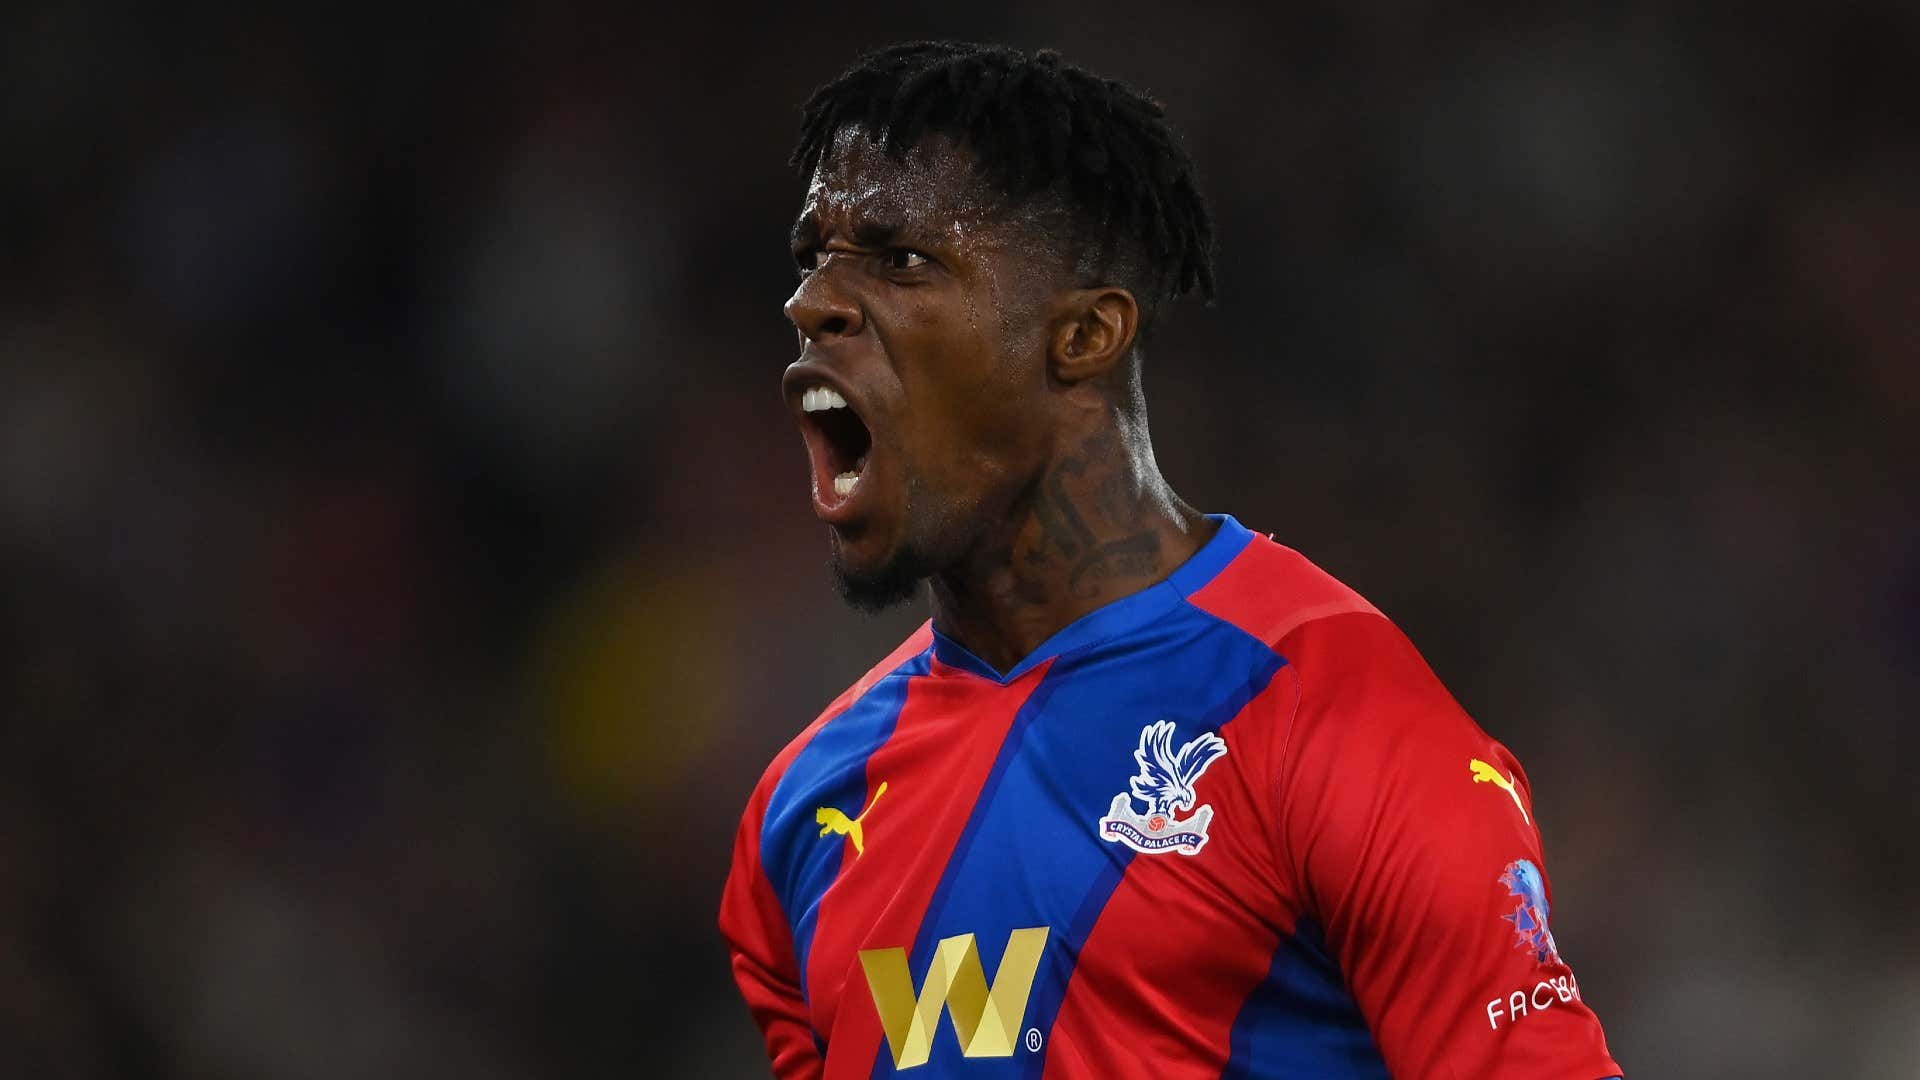 Crystal Palace’s Zaha: Why I did not celebrate like ‘a mad man’ against Wolves